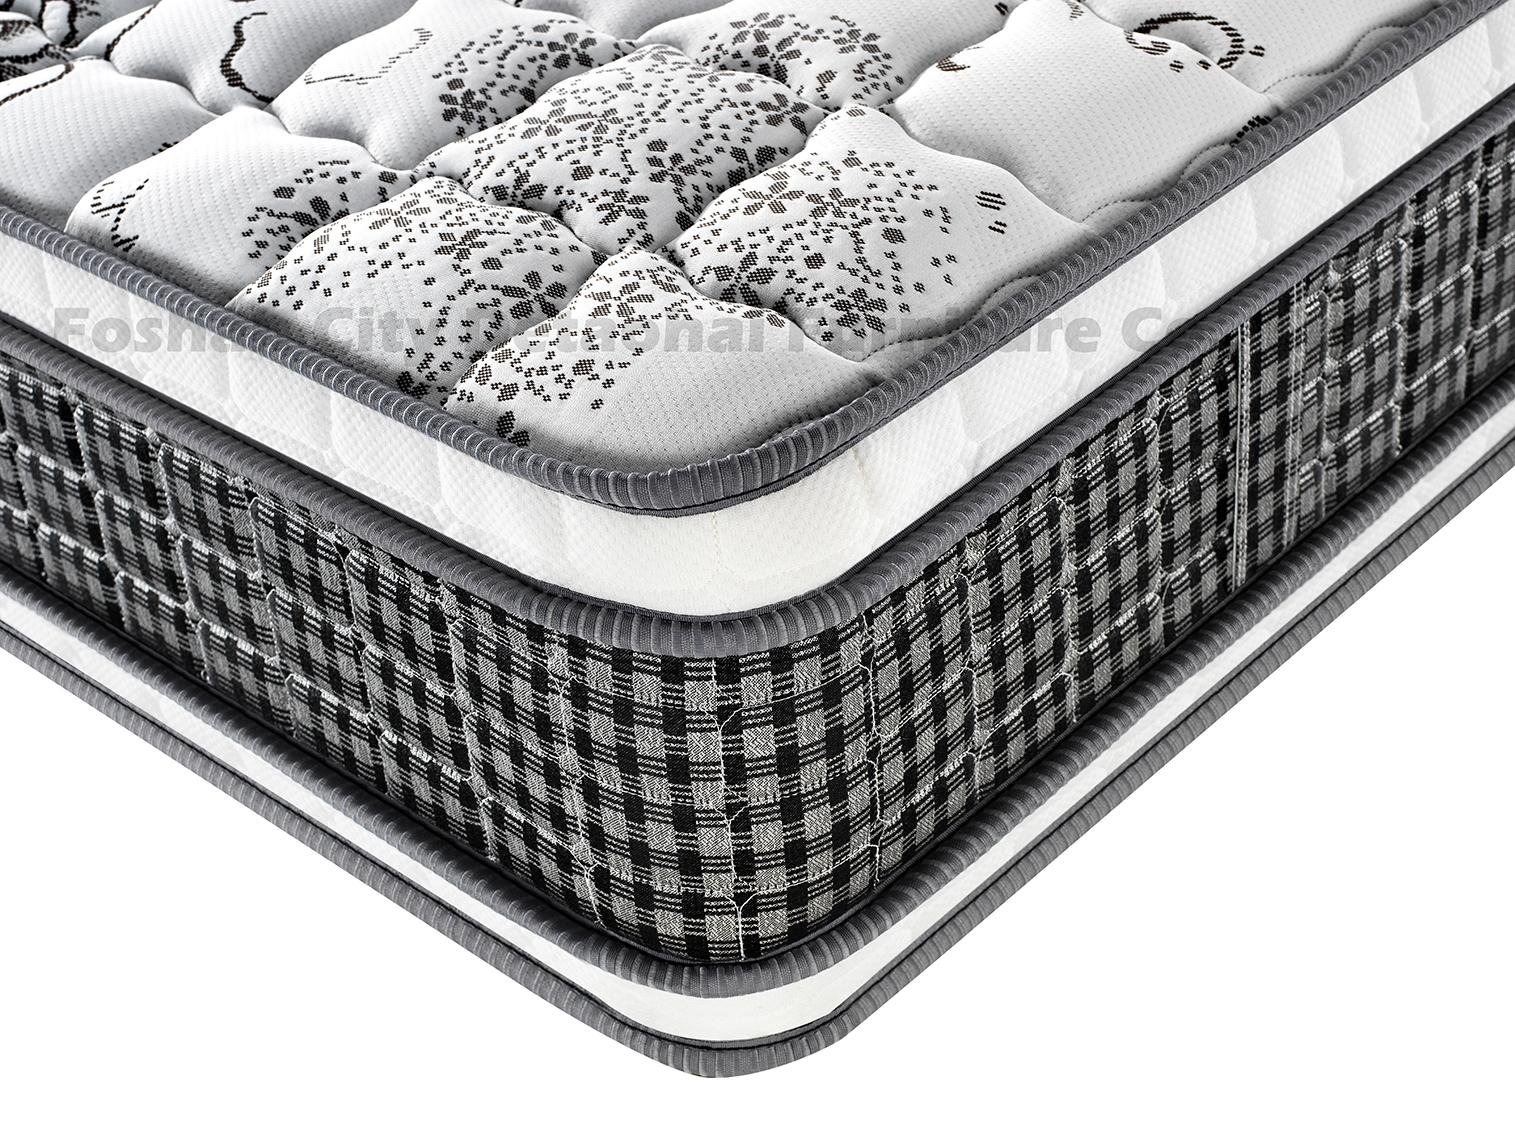 Double sided use pocket spring mattress with high quality 3